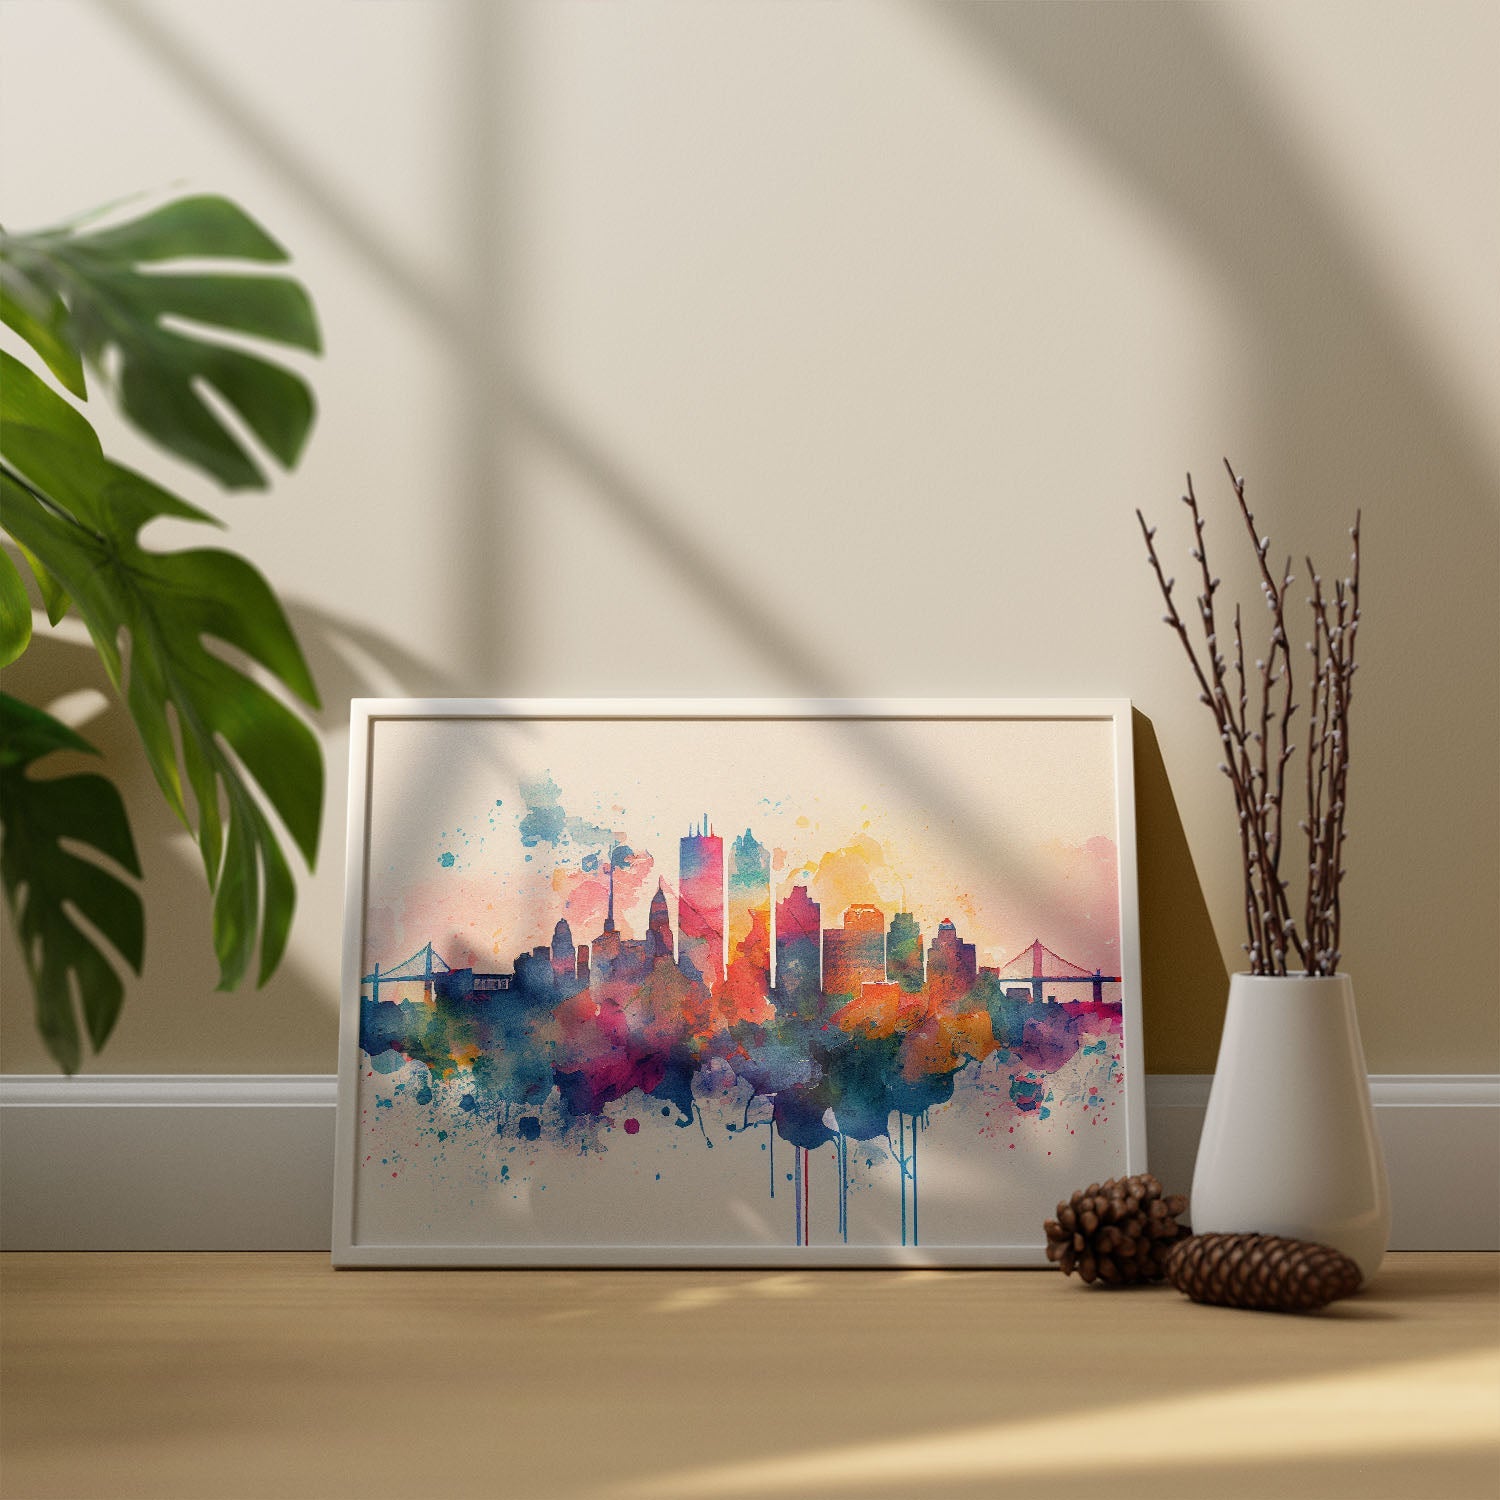 Nacnic watercolor of a skyline of the city of Boston_1. Aesthetic Wall Art Prints for Bedroom or Living Room Design.-Artwork-Nacnic-A4-Sin Marco-Nacnic Estudio SL